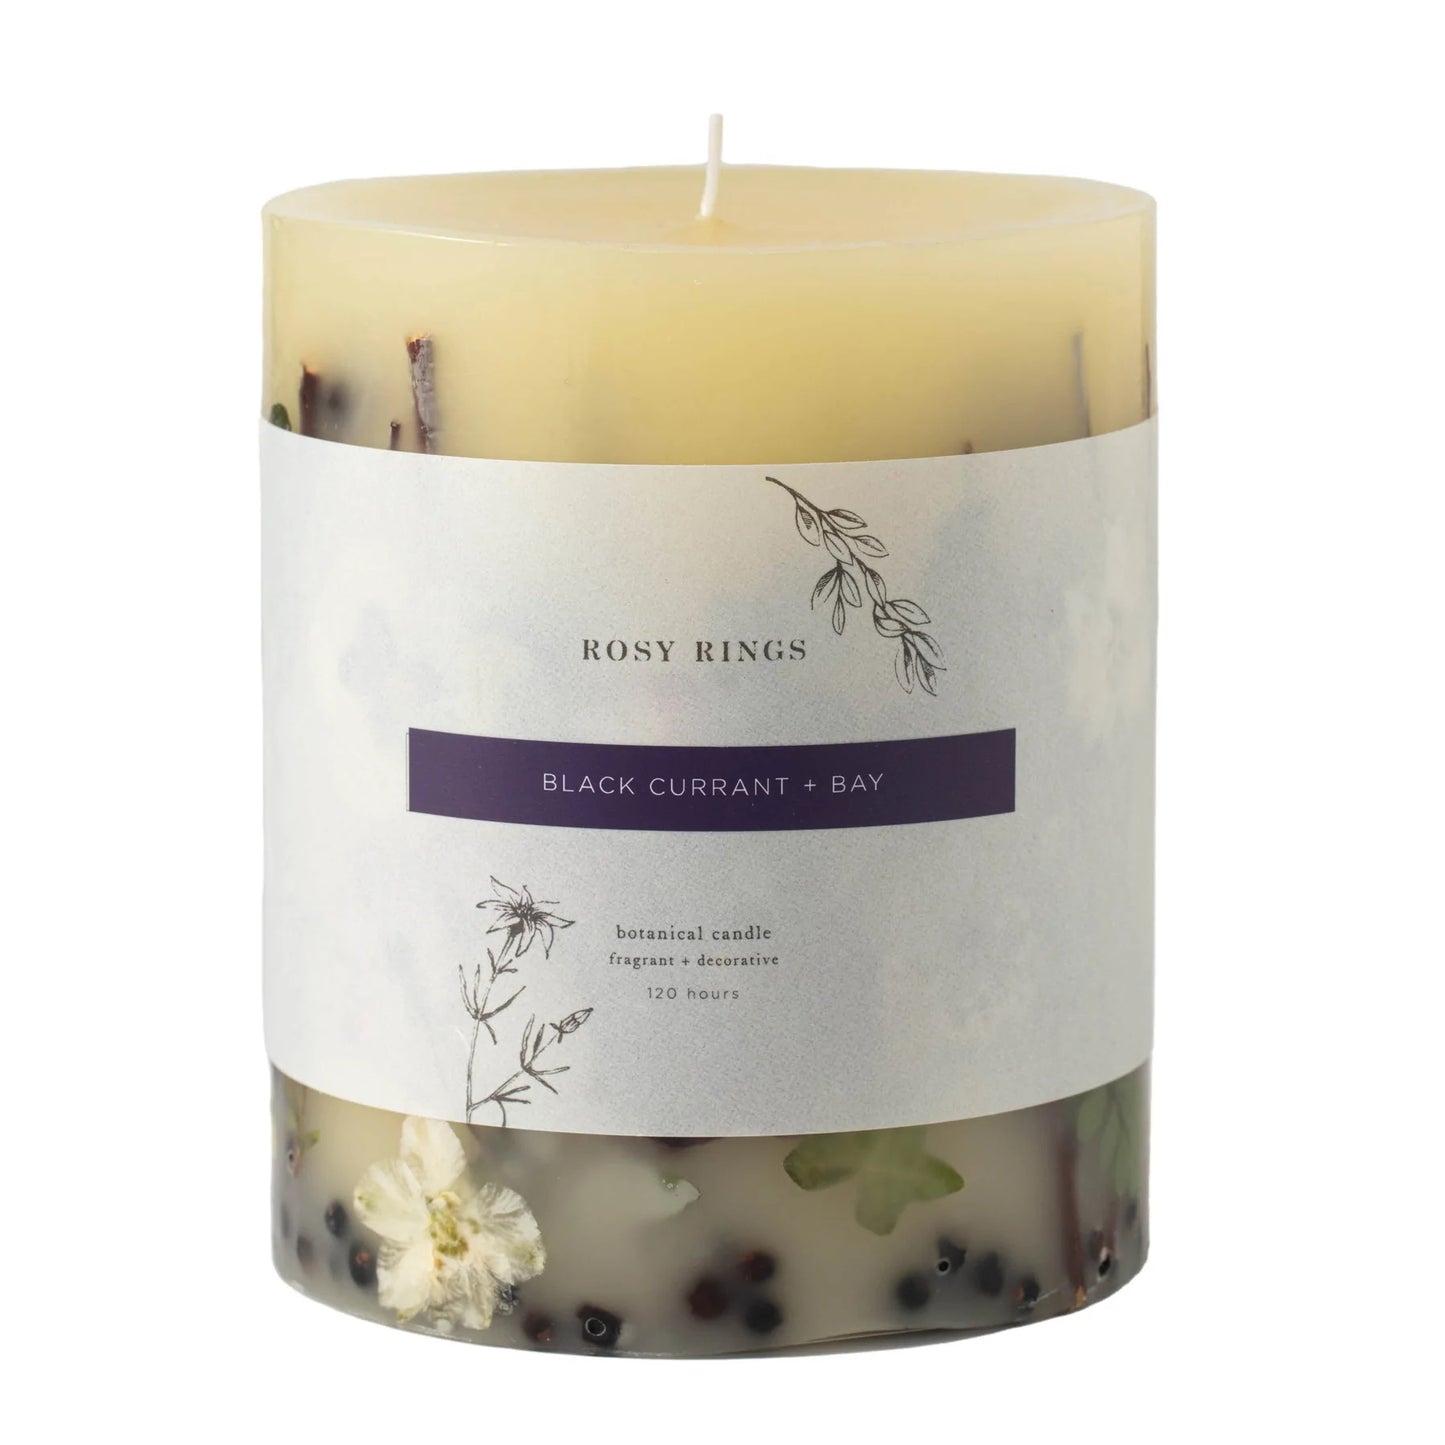 Rosy Rings, Black Currant + Bay Small Round Botanical Candle - Boutique Dandelion